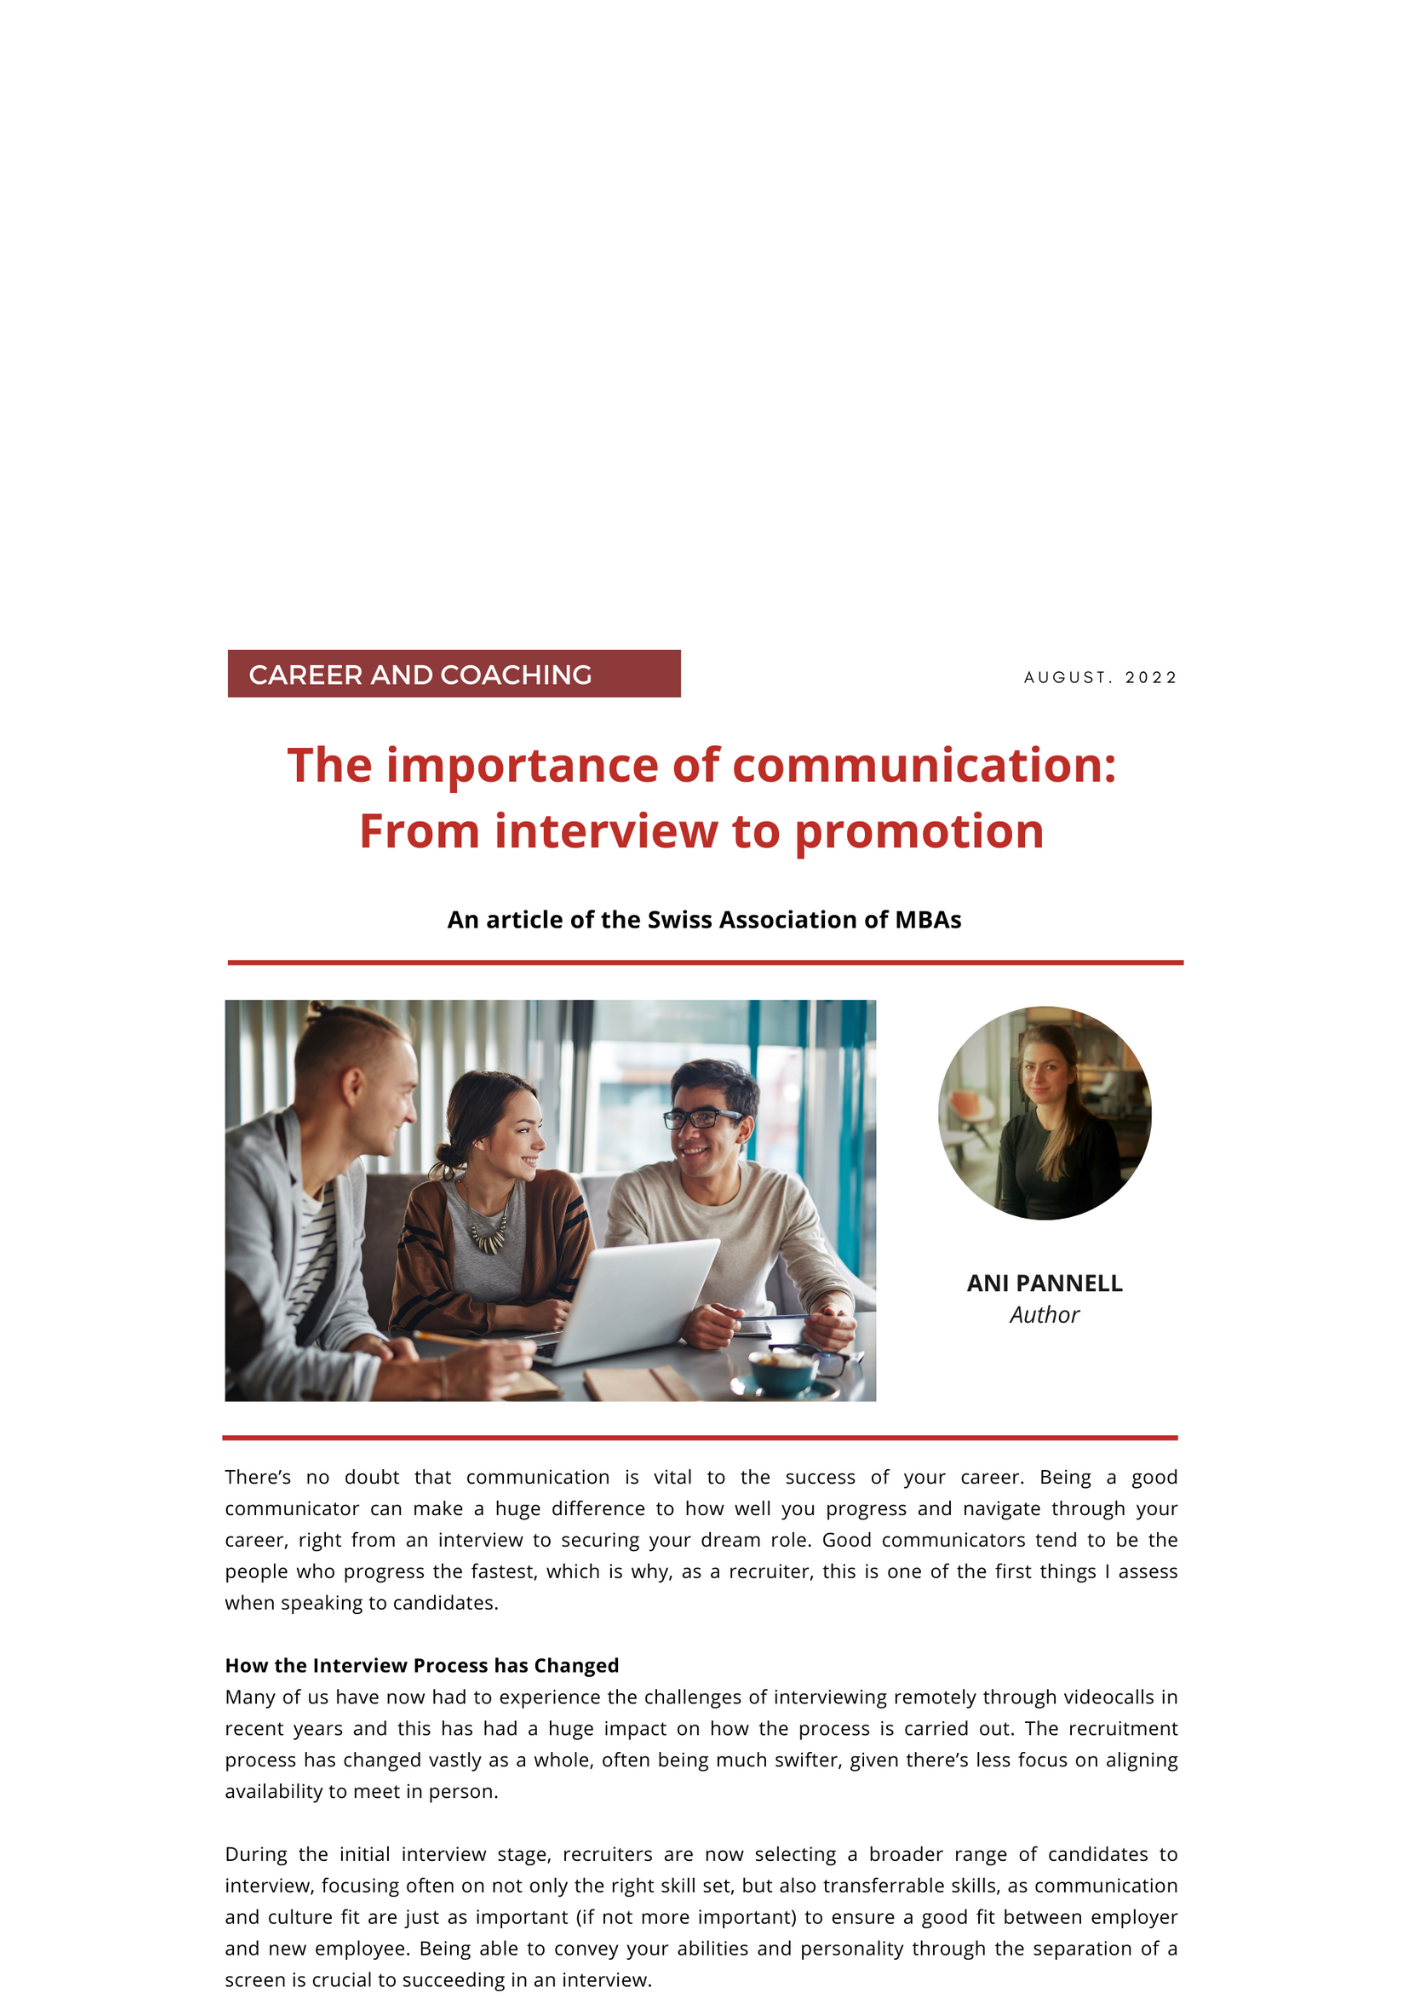 The importance of communication: From interview to promotion